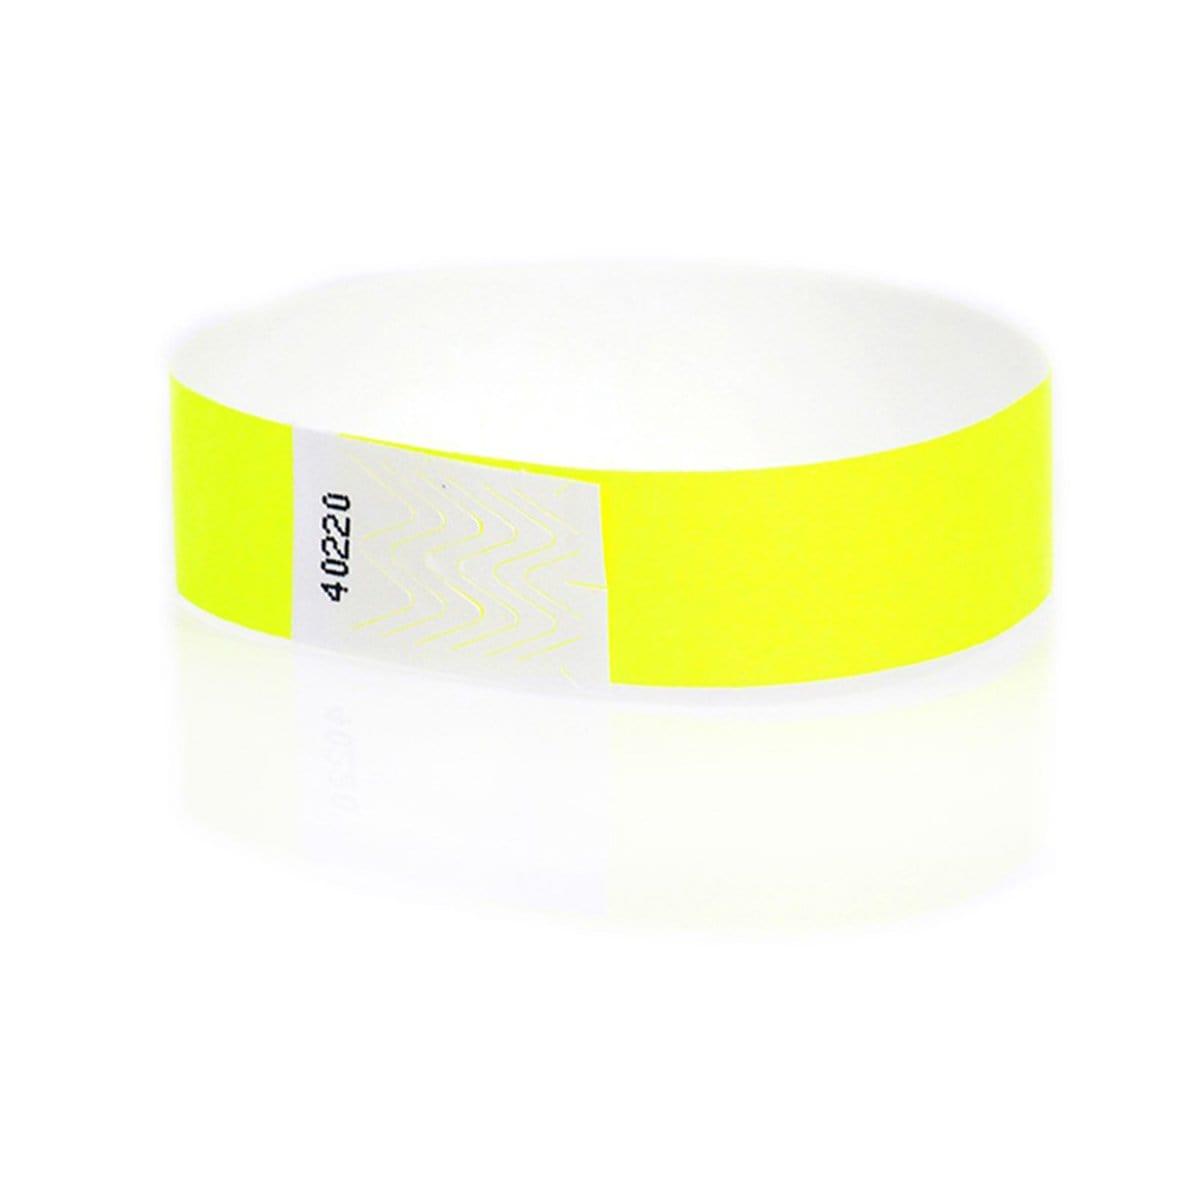 Buy Party Supplies Wristband Supertek 3/4in Yellow Glow 100 Pkg. sold at Party Expert